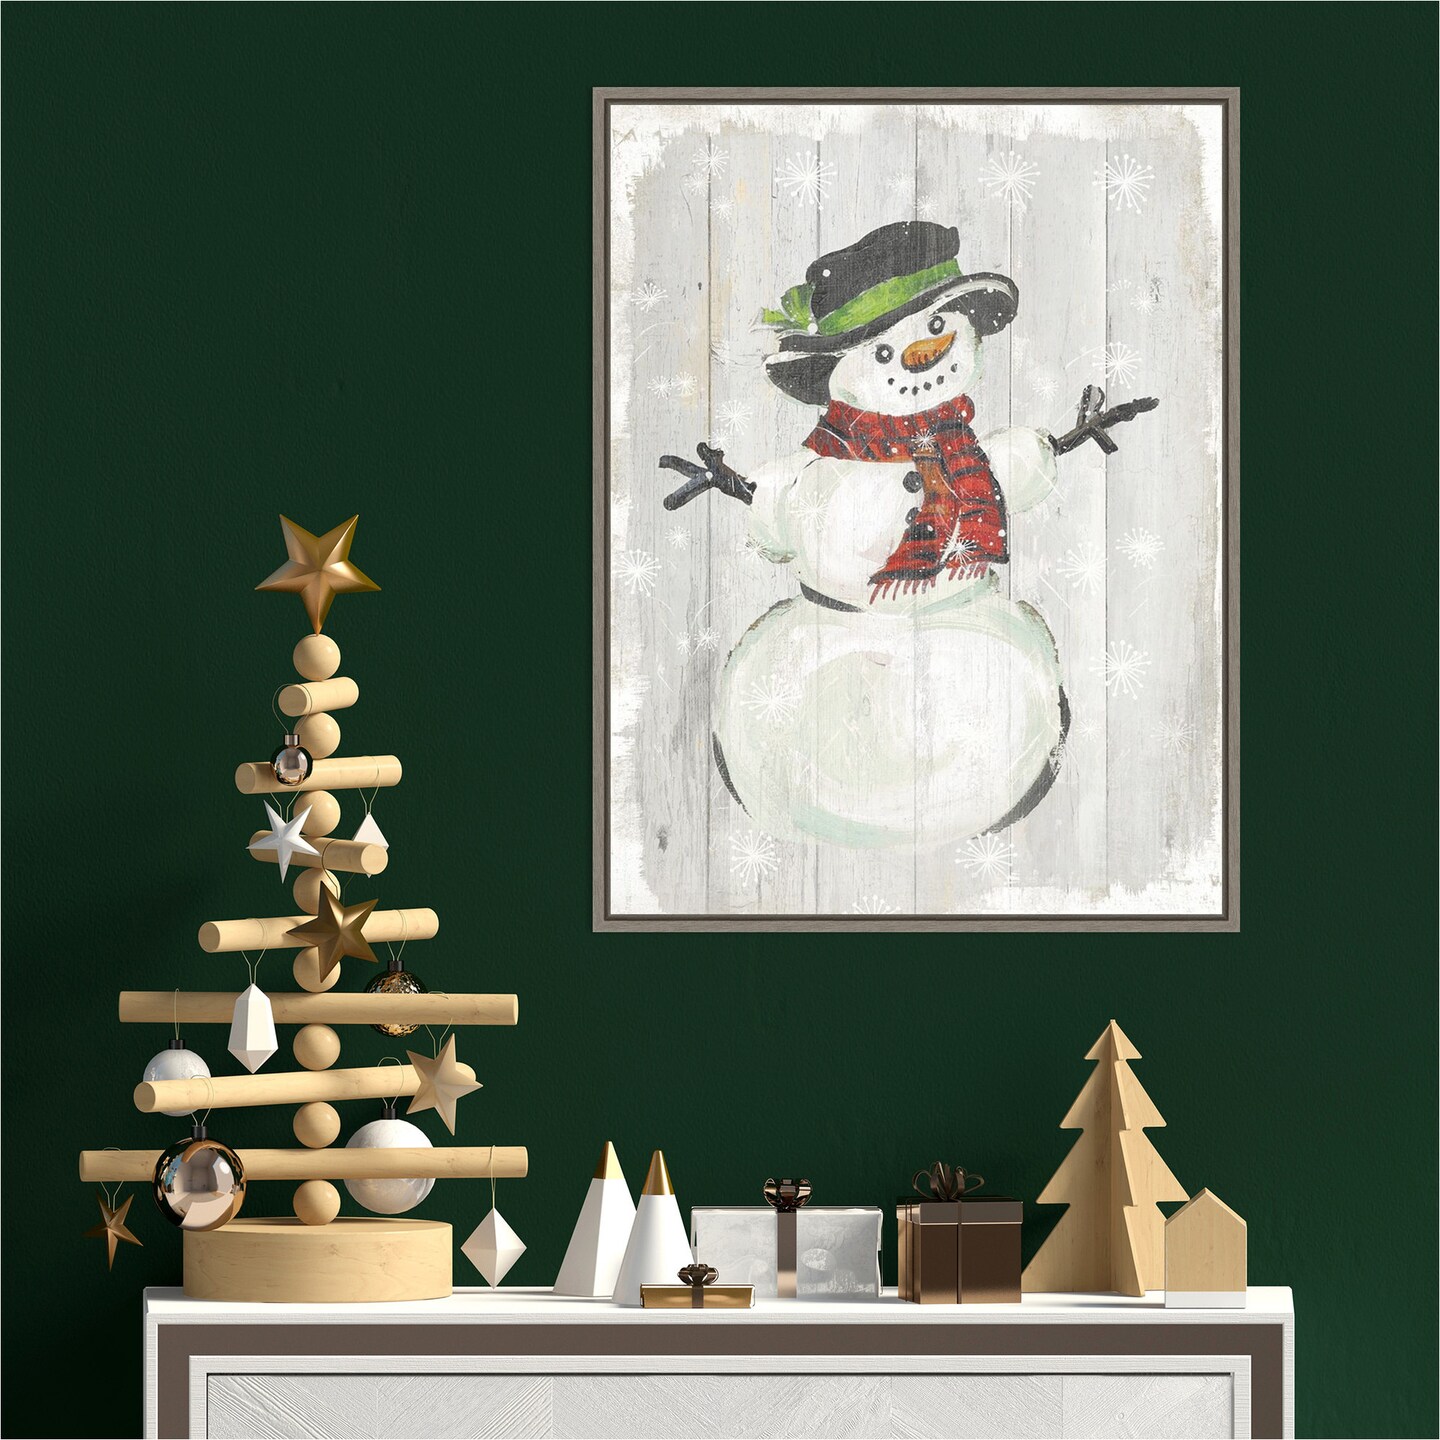 Holiday Snowman by PI Studio 18-in. W x 24-in. H. Canvas Wall Art Print Framed in Grey